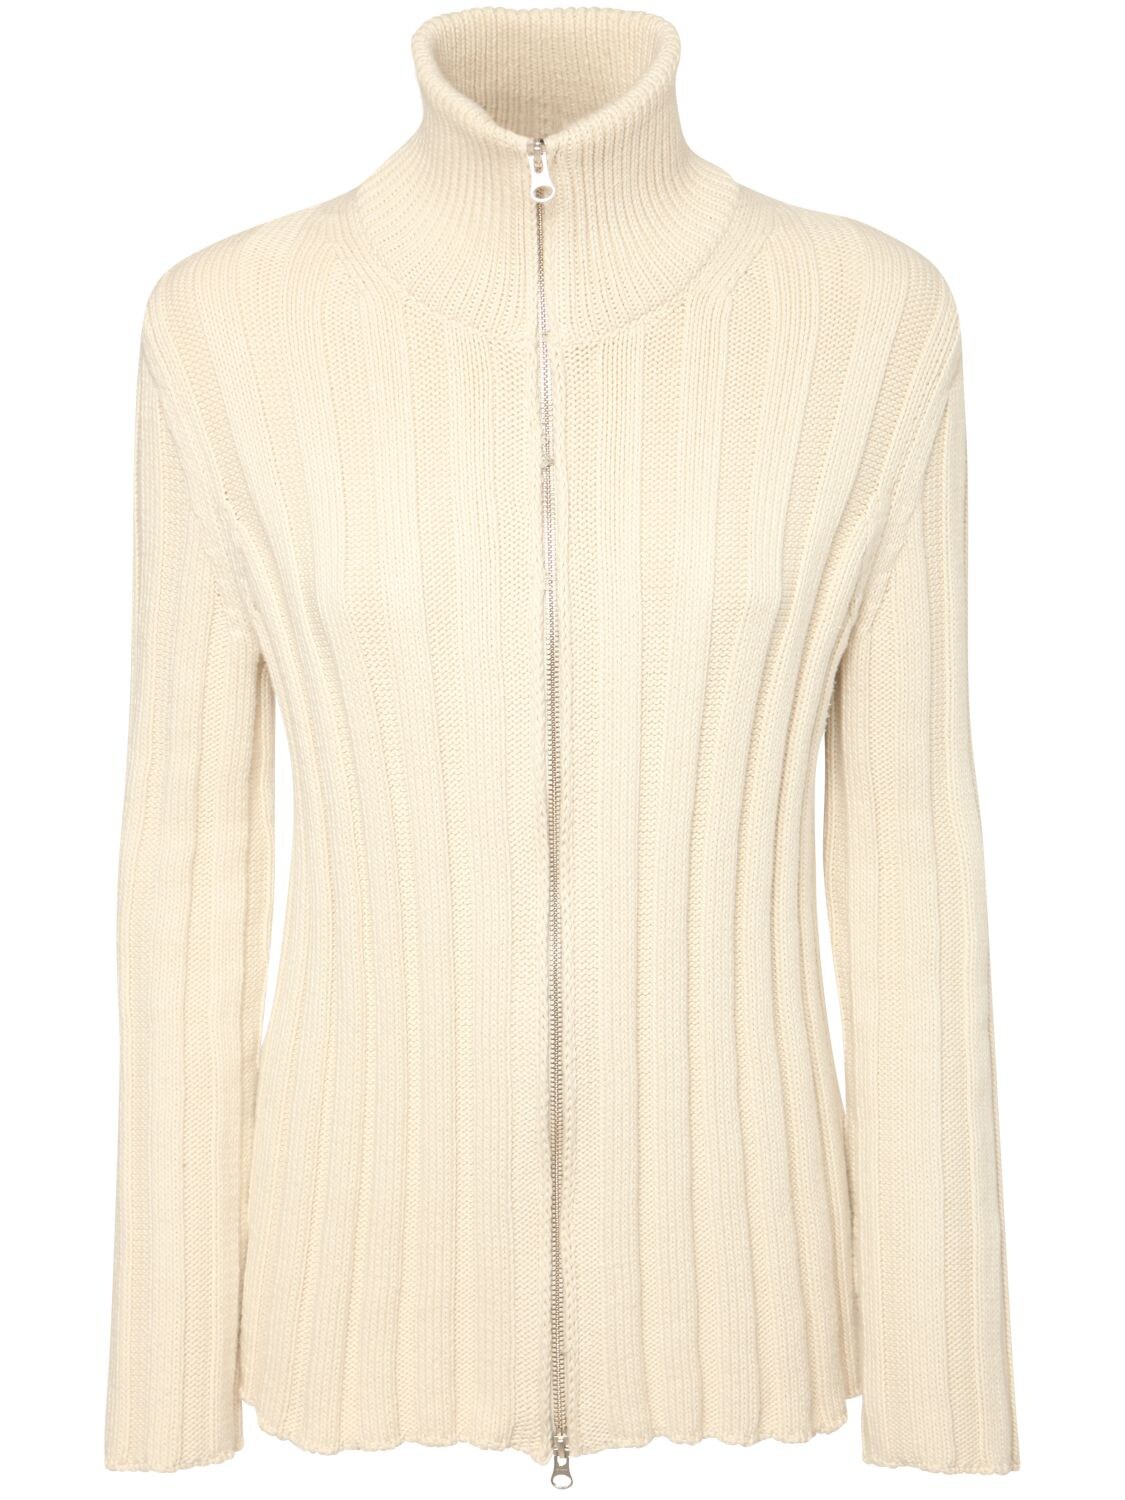 Mm6 Maison Margiela Logo Ribbed Knit Cotton Zip Sweater In Off-white